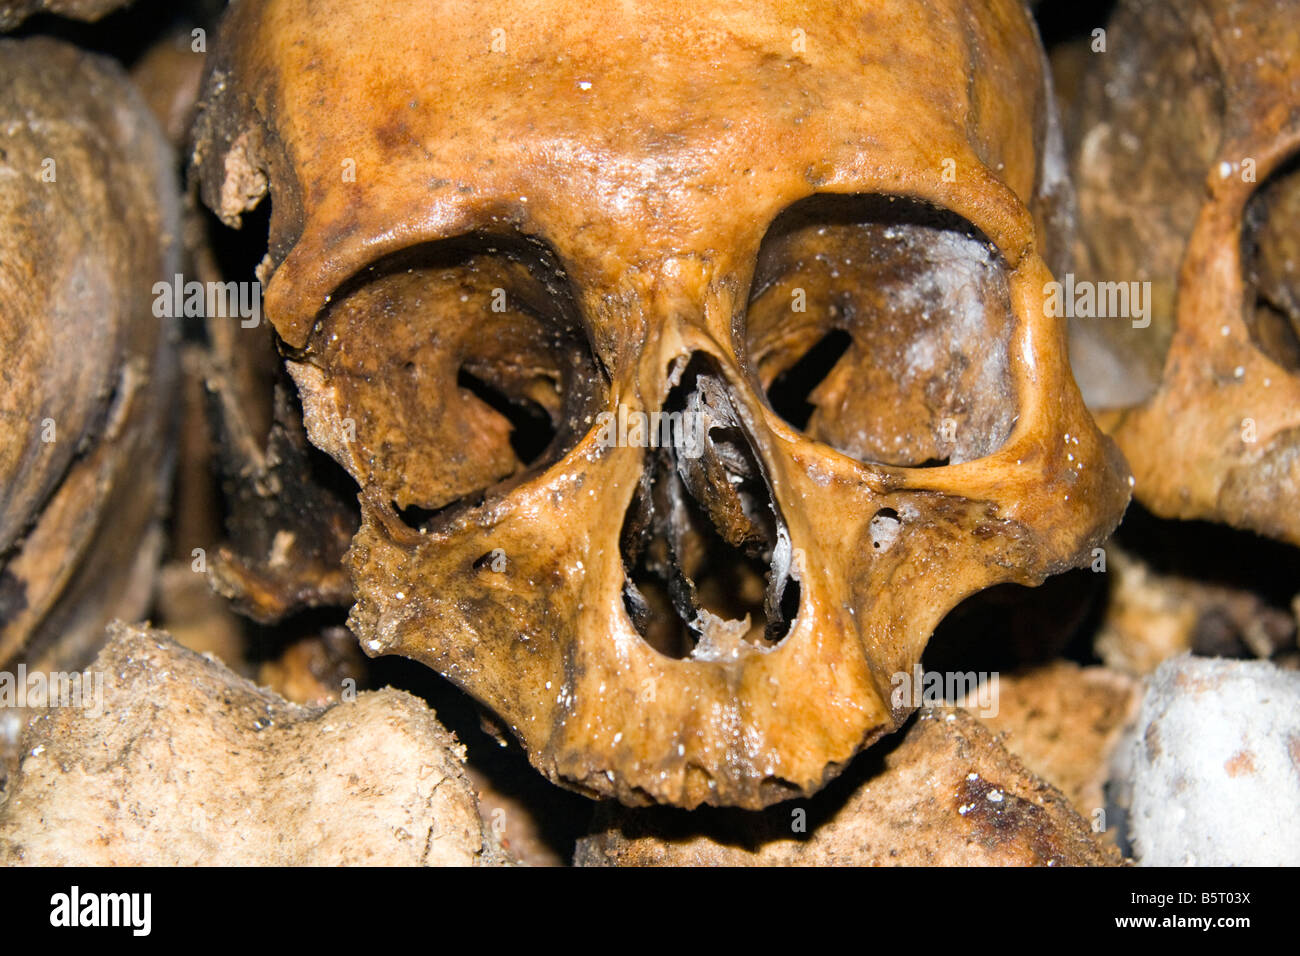 One of the many skulls and bones in the catacombs, paris, france Stock Photo